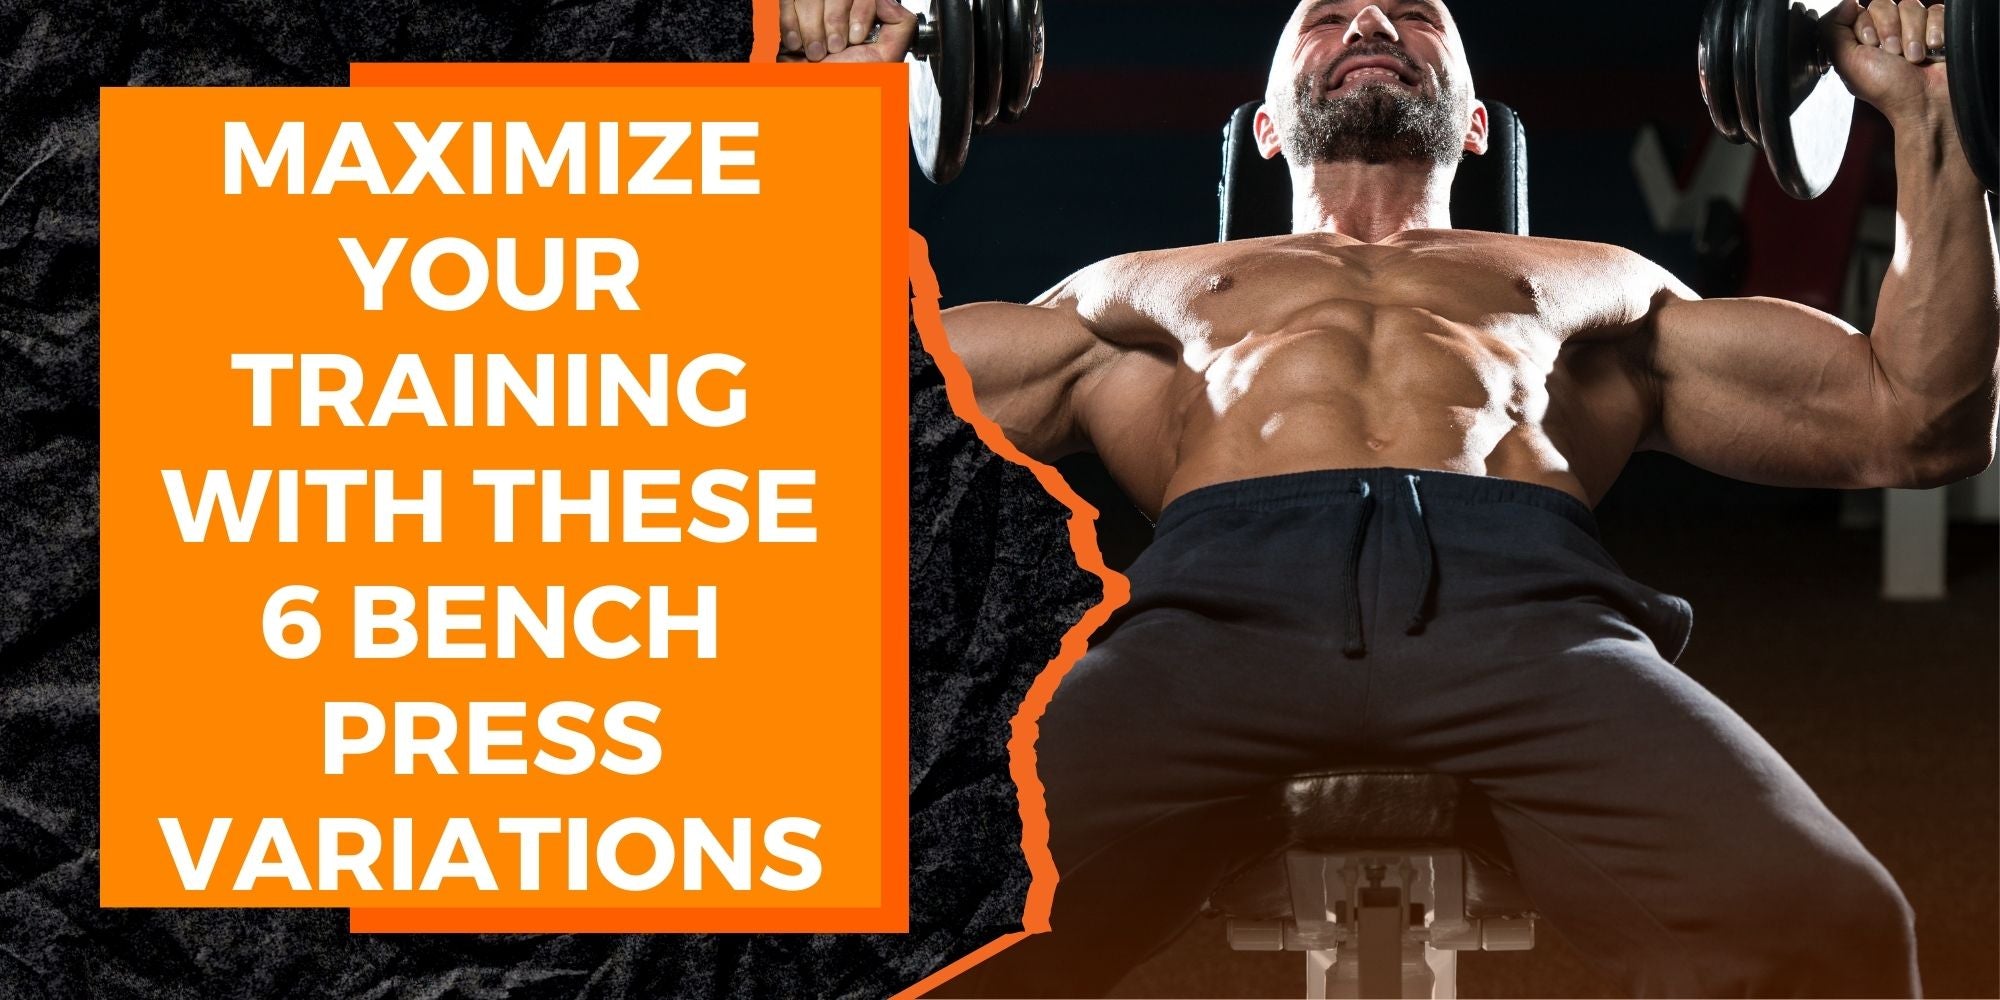 Maximize Your Strength Training with These 6 Bench Press Variations